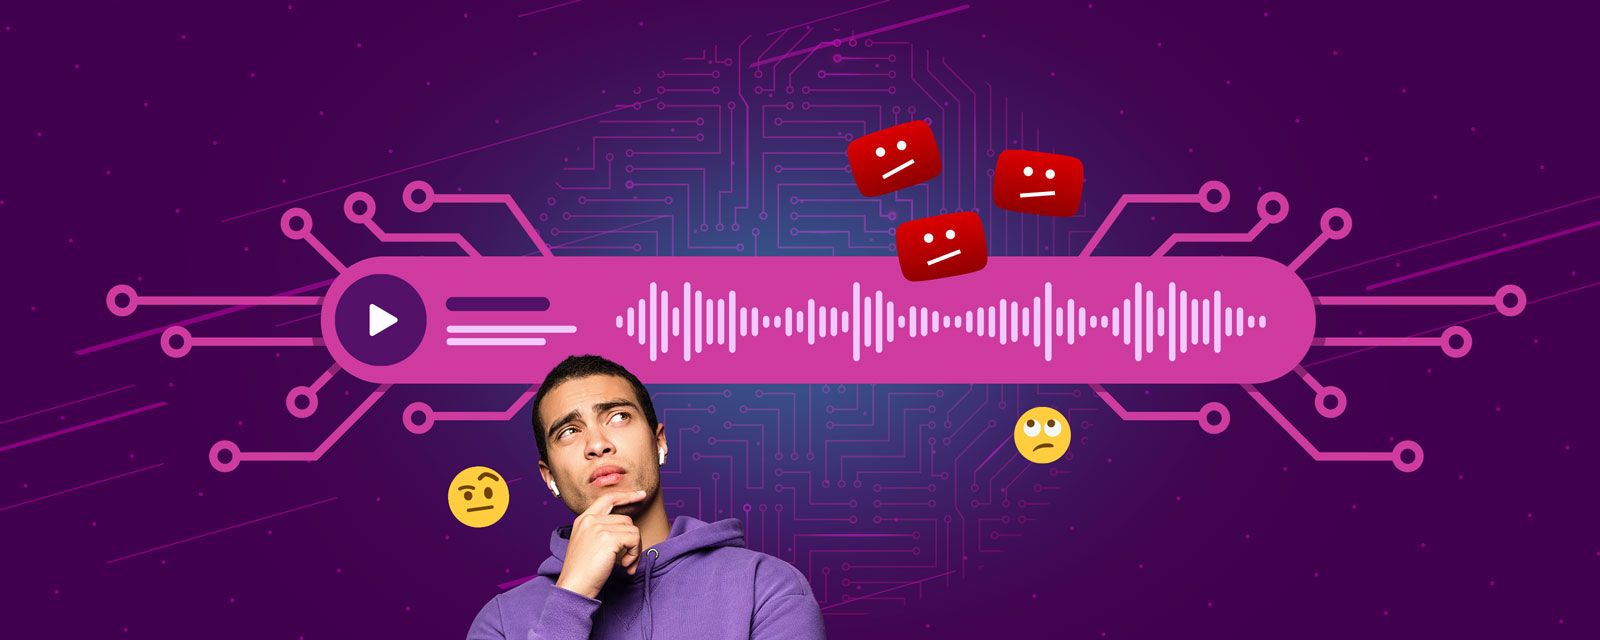 Illustration of a content creator looking apprehensive in front of an AI music sound bar.